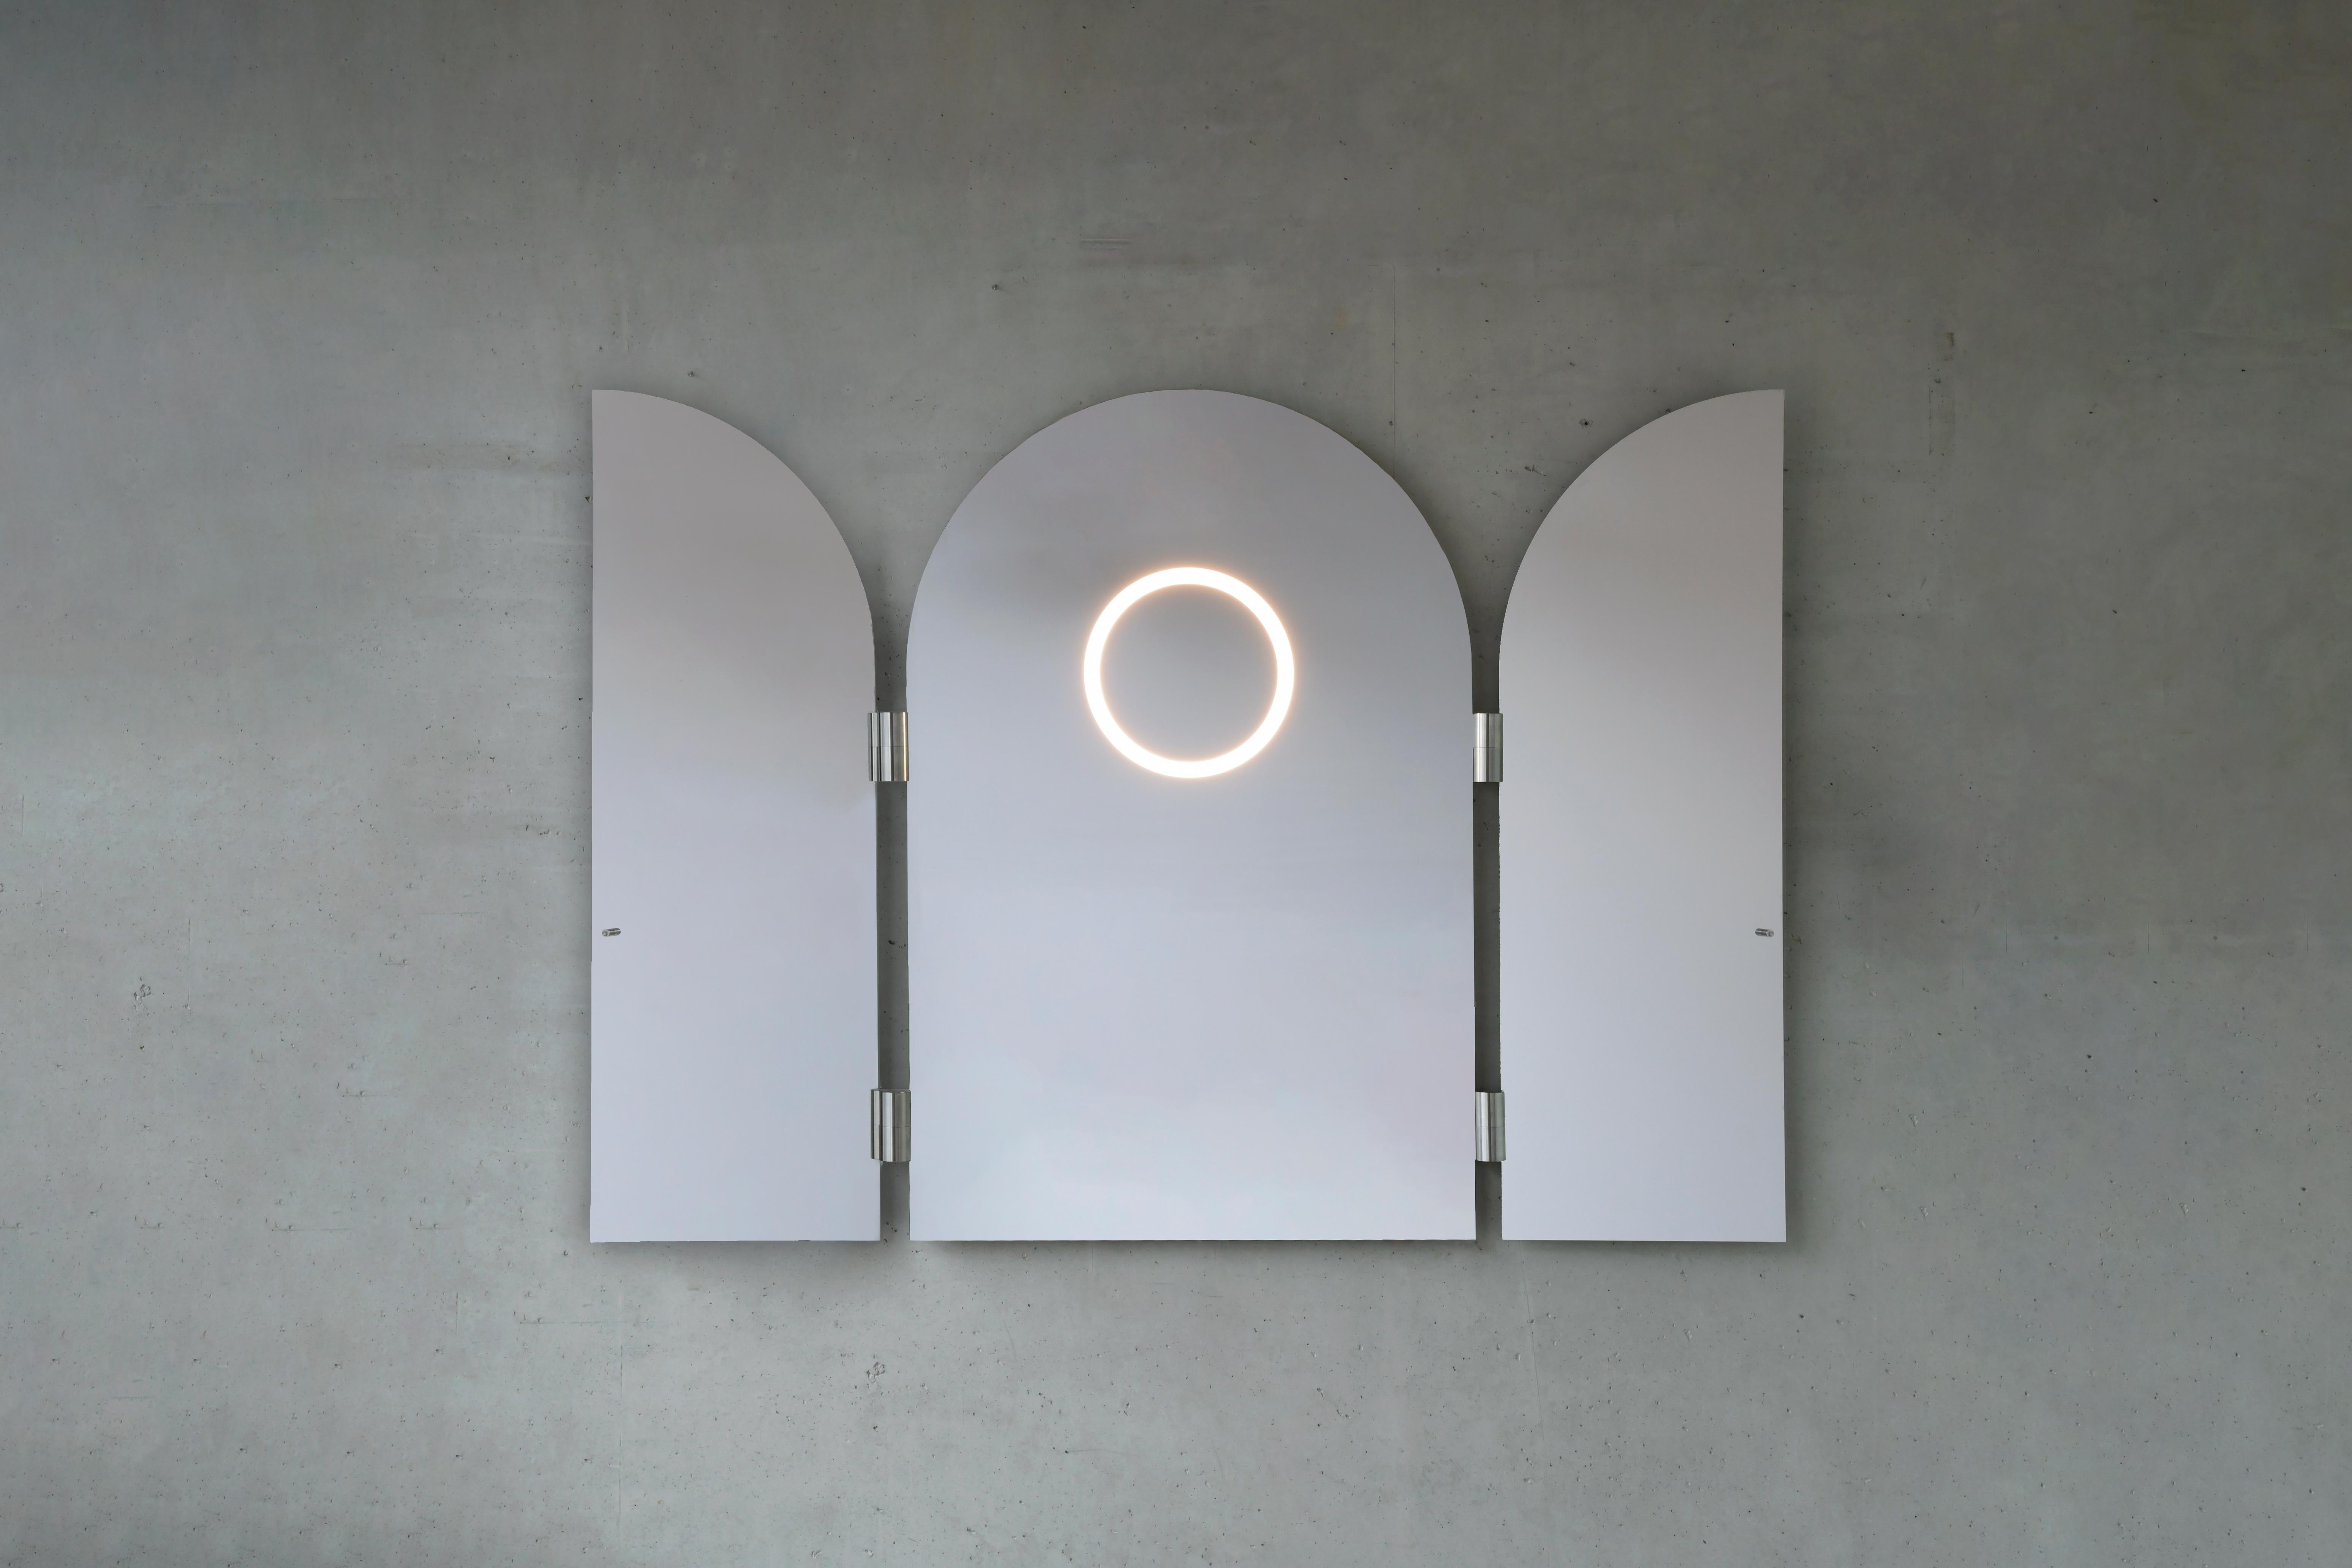 Monumental triptychs Mirror by Jesse Visser
Dimensions: 165 x 230 x 5 cm
Polished stainless steel, dimmable led light

Jesse Visser presents imposing monumental limited editions: triptychs – of which the largest is 1.65 meters high and 2.30